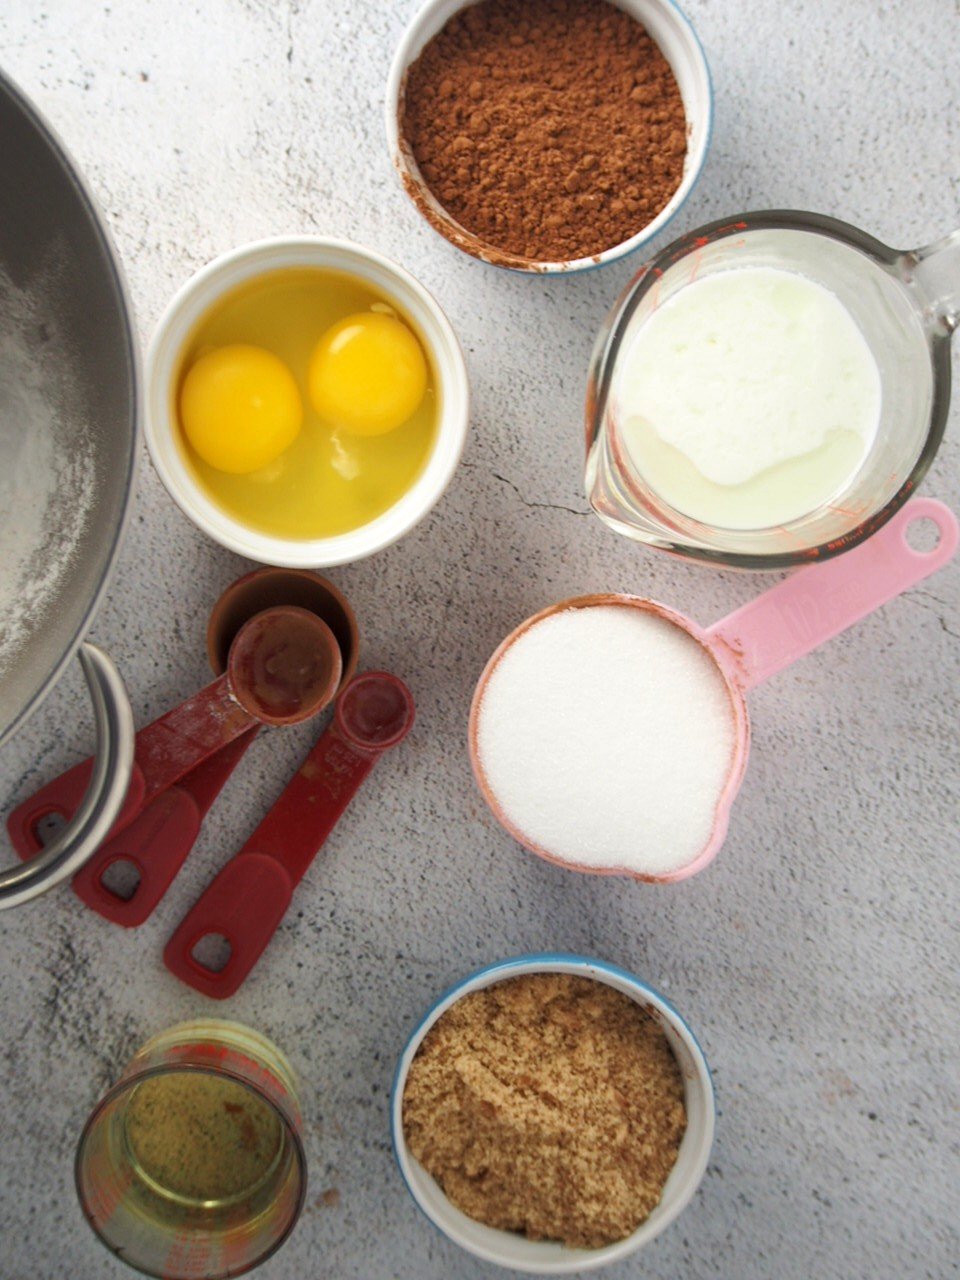 Ingredients for the chocolate cupcakes.